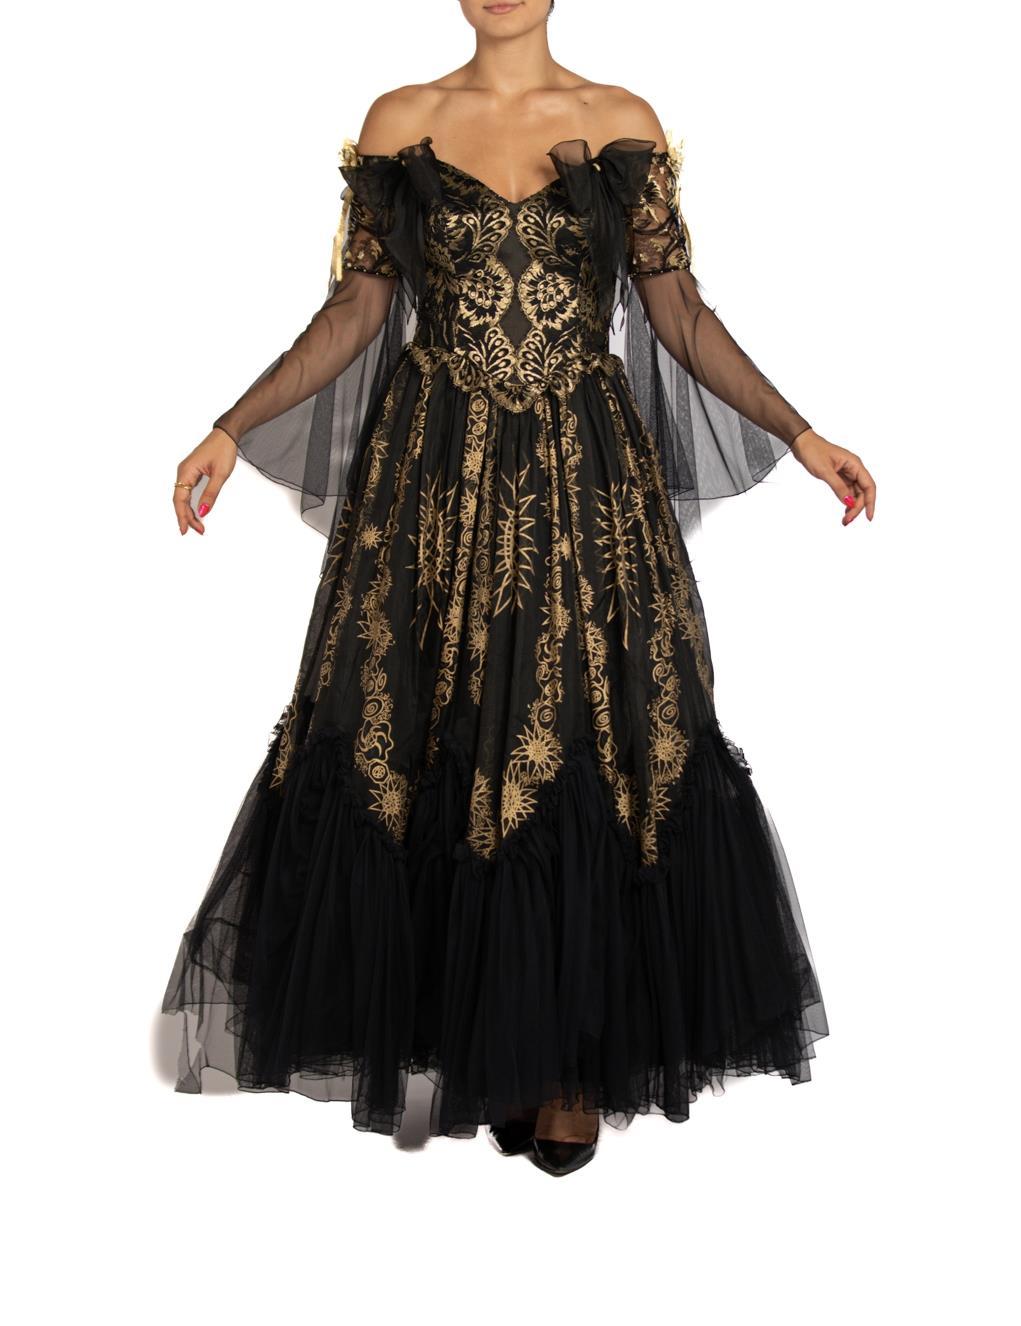 1980S ZANDRA RHODES Black & Gold Lace Ball Gown For Sale 1